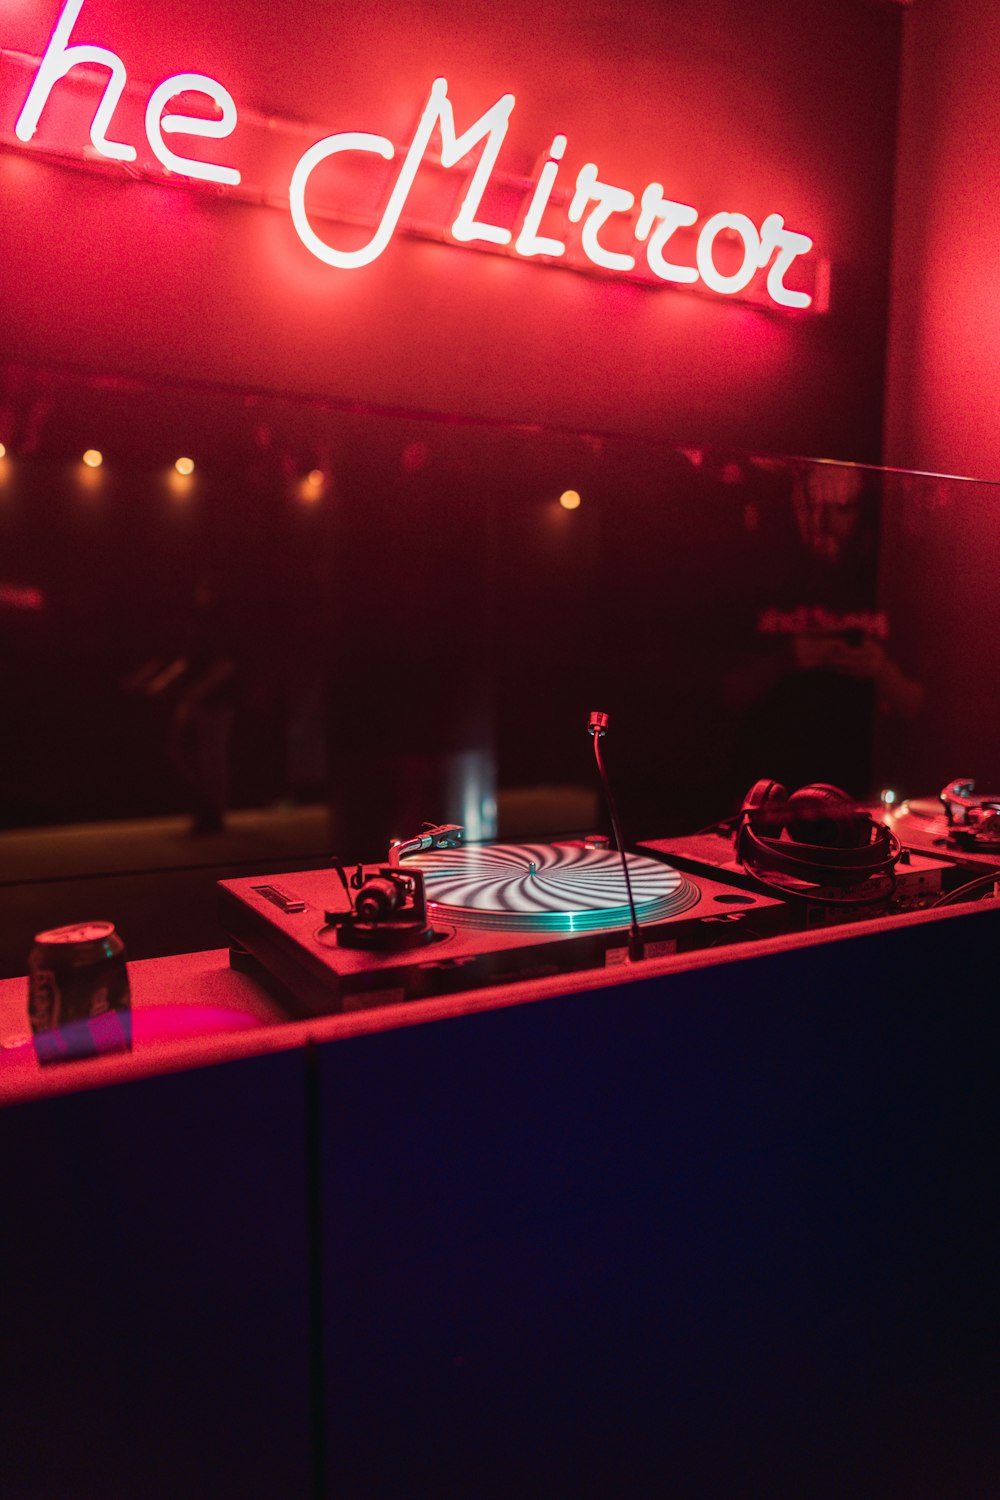 a dj booth with a neon sign in the background